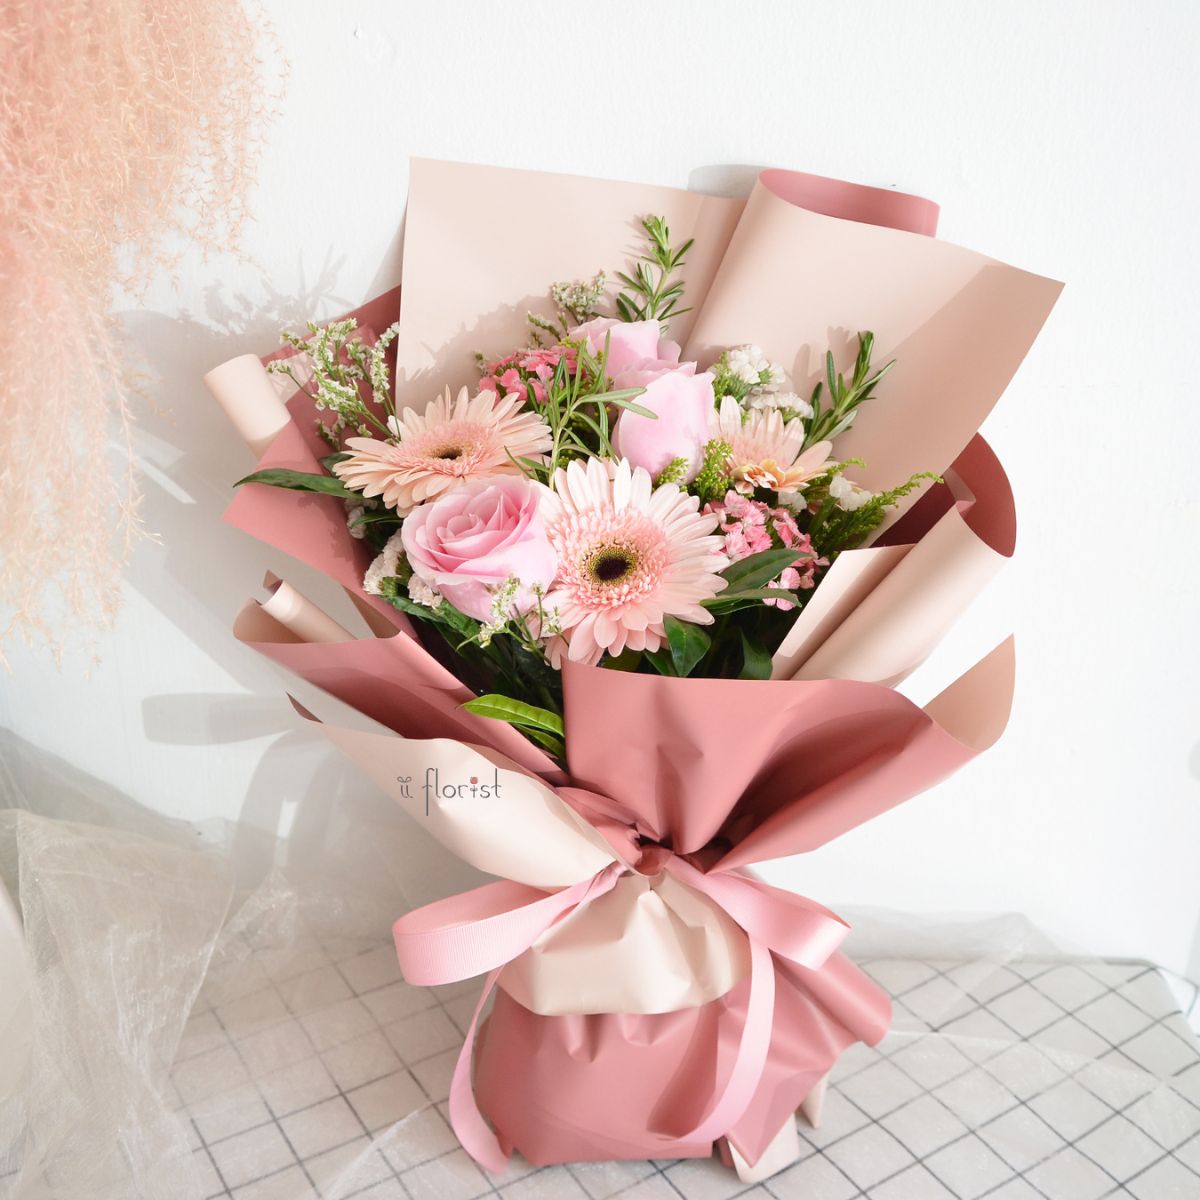 the-meaning-of-the-10-most-popular-flowers-as-gifts-featured